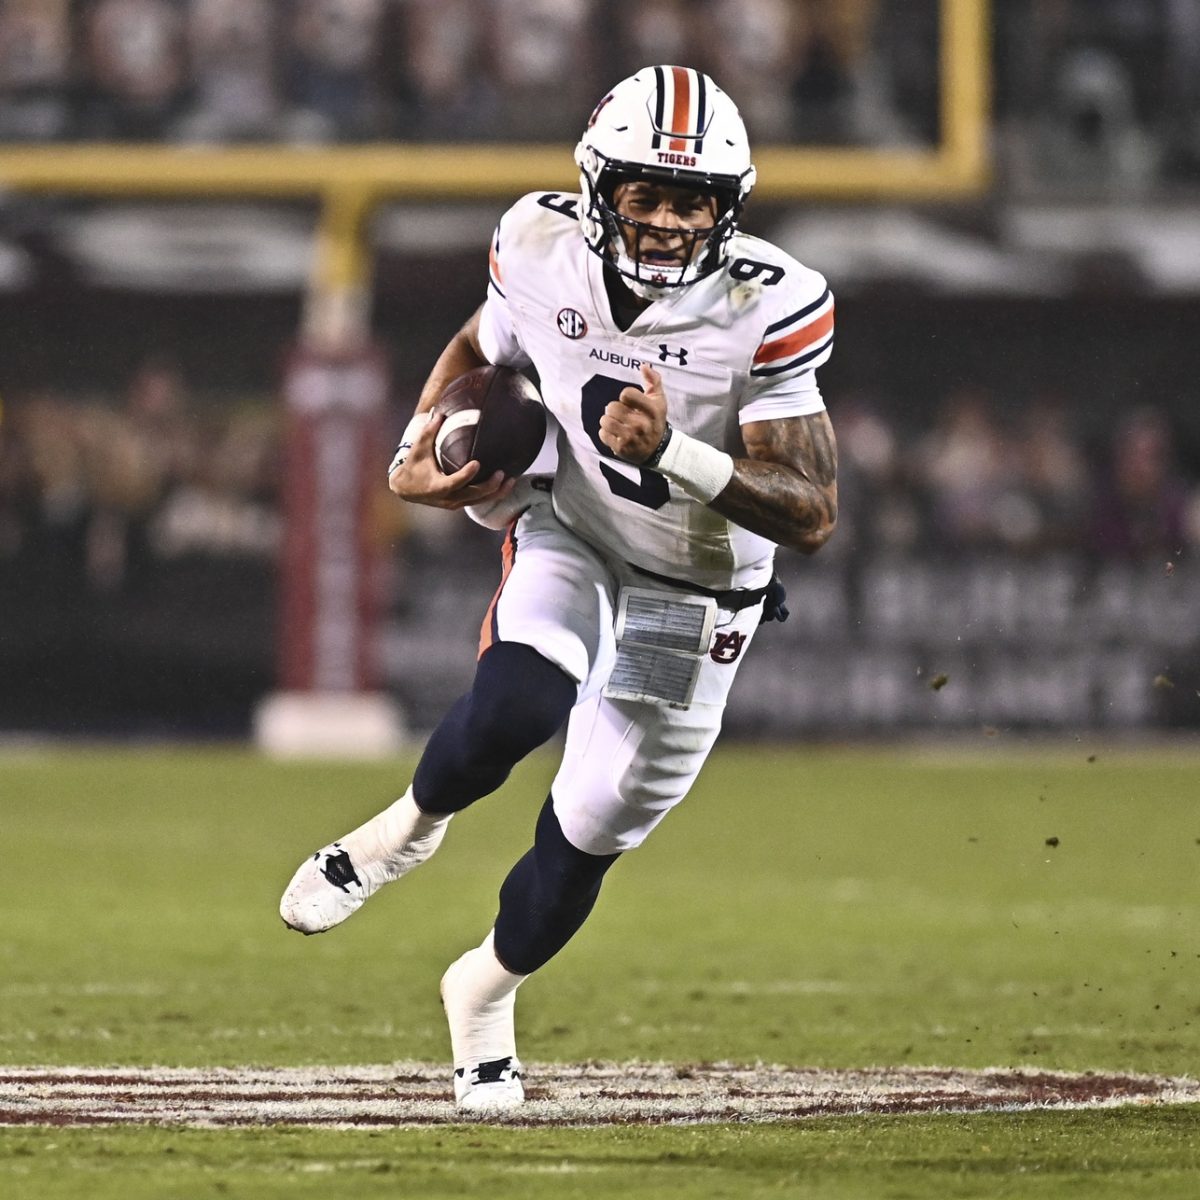 Western Kentucky vs. Auburn Prediction, Preview, and Odds - 11-19-2022